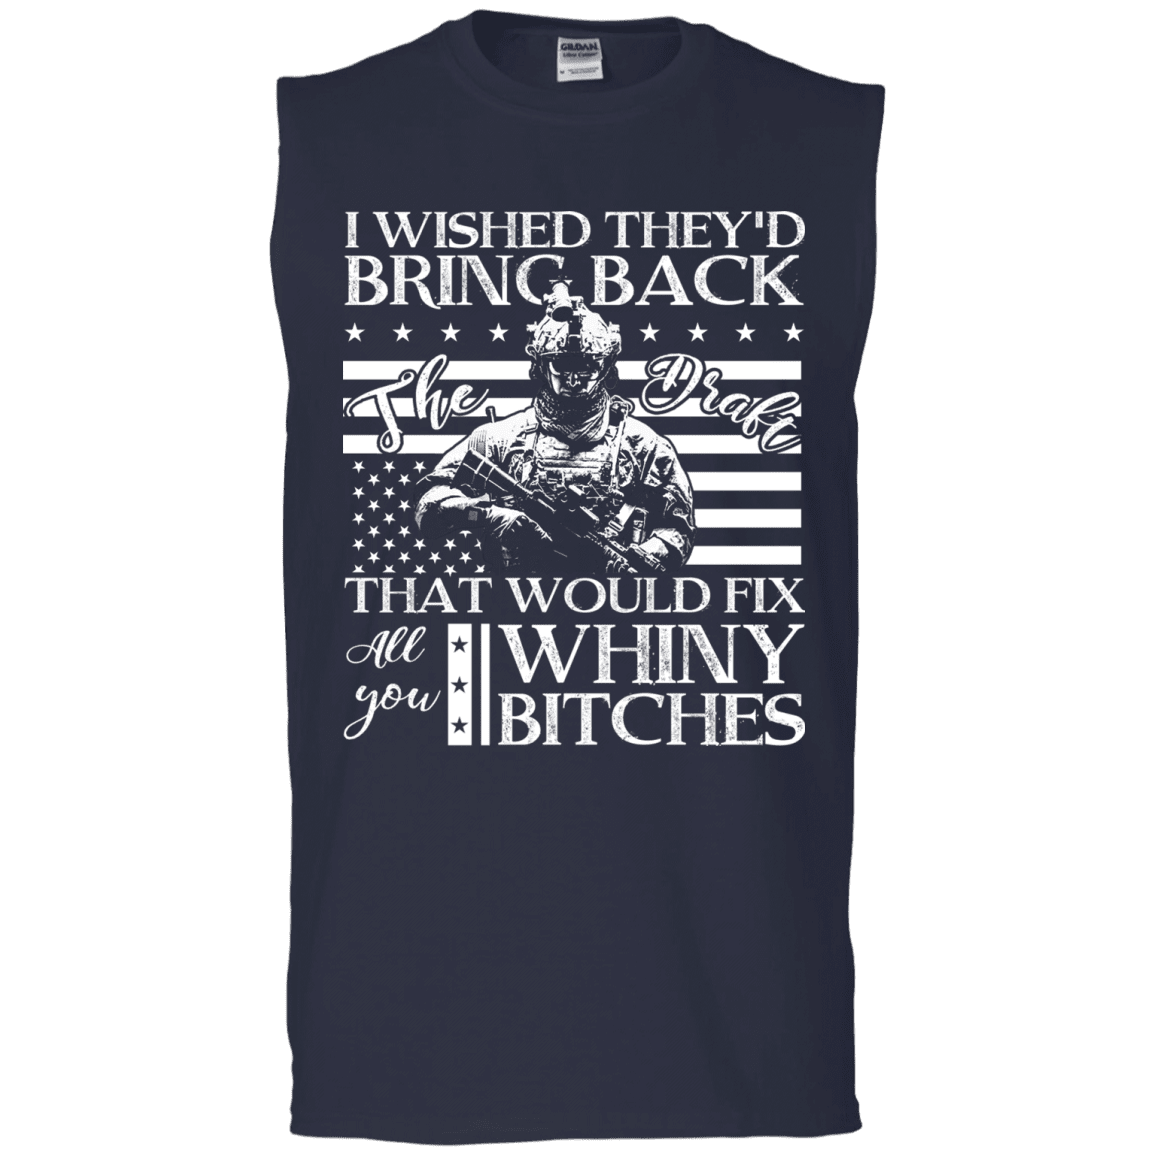 Military T-Shirt "I Wished They'd Bring Back Veteran" Front-TShirt-General-Veterans Nation